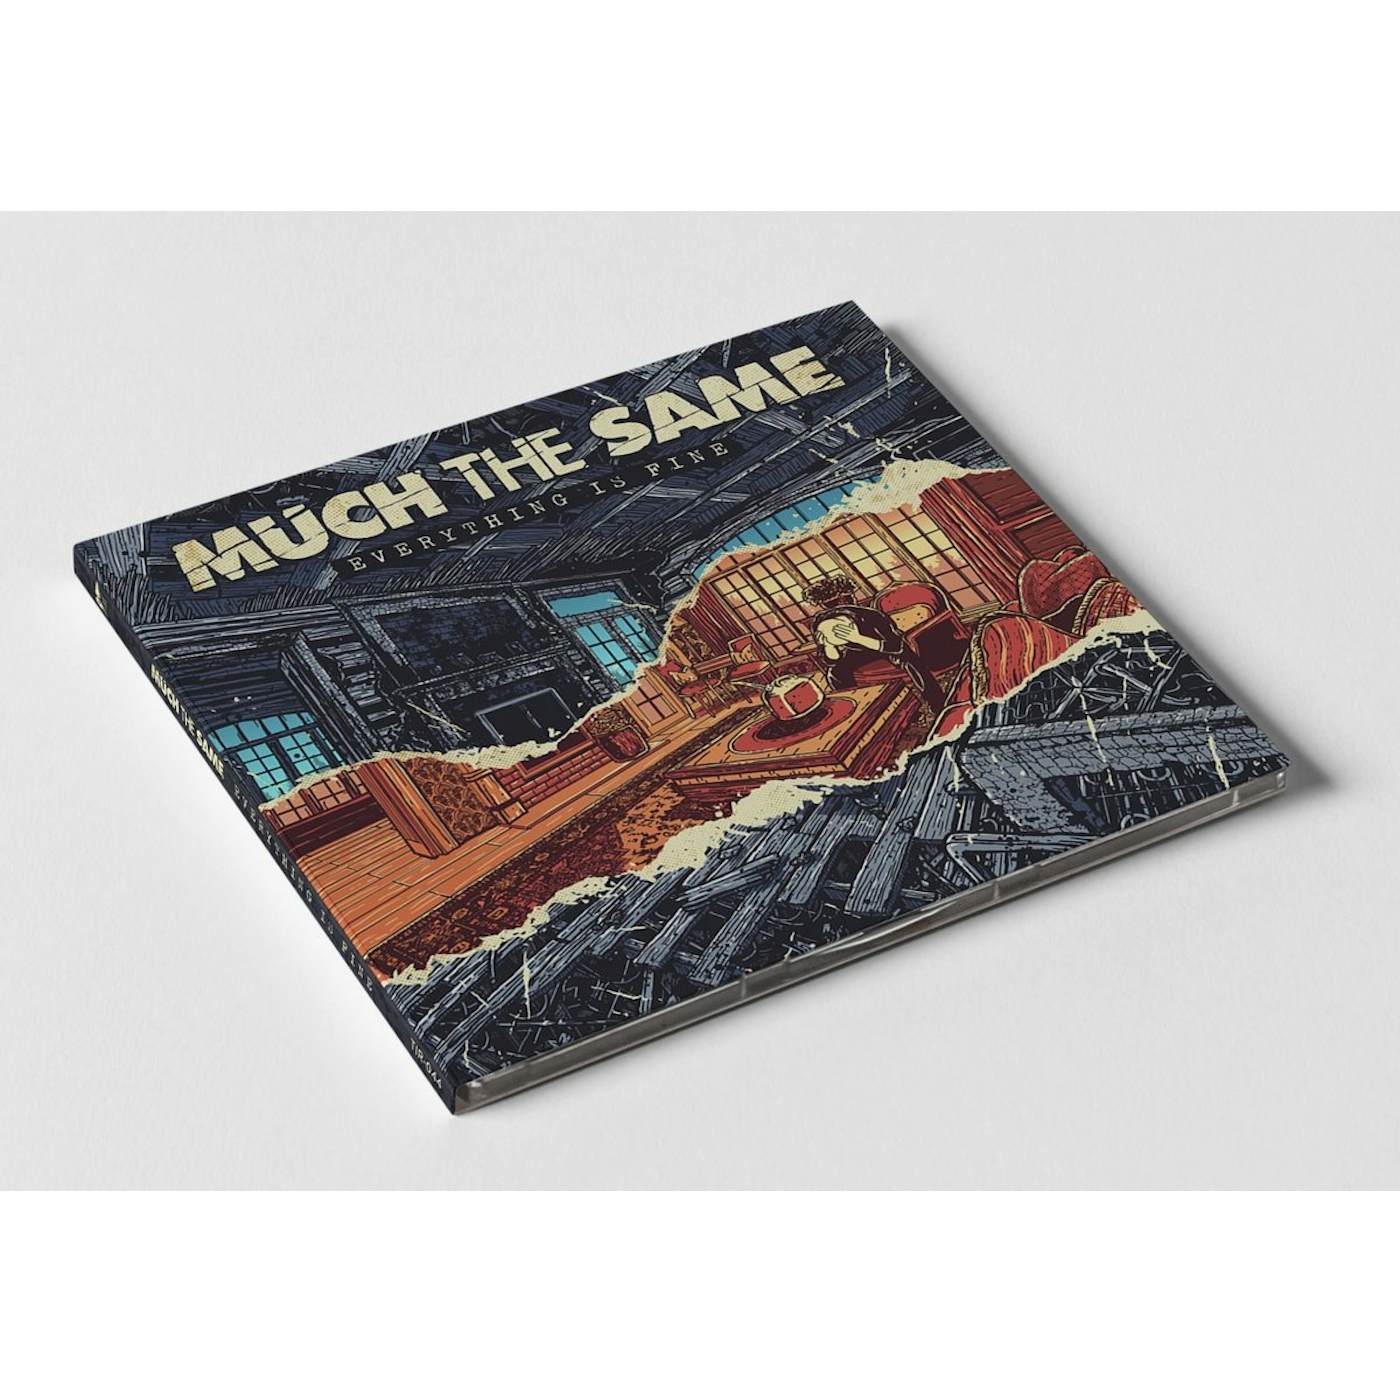 Much The Same / Everything Is Fine - CD